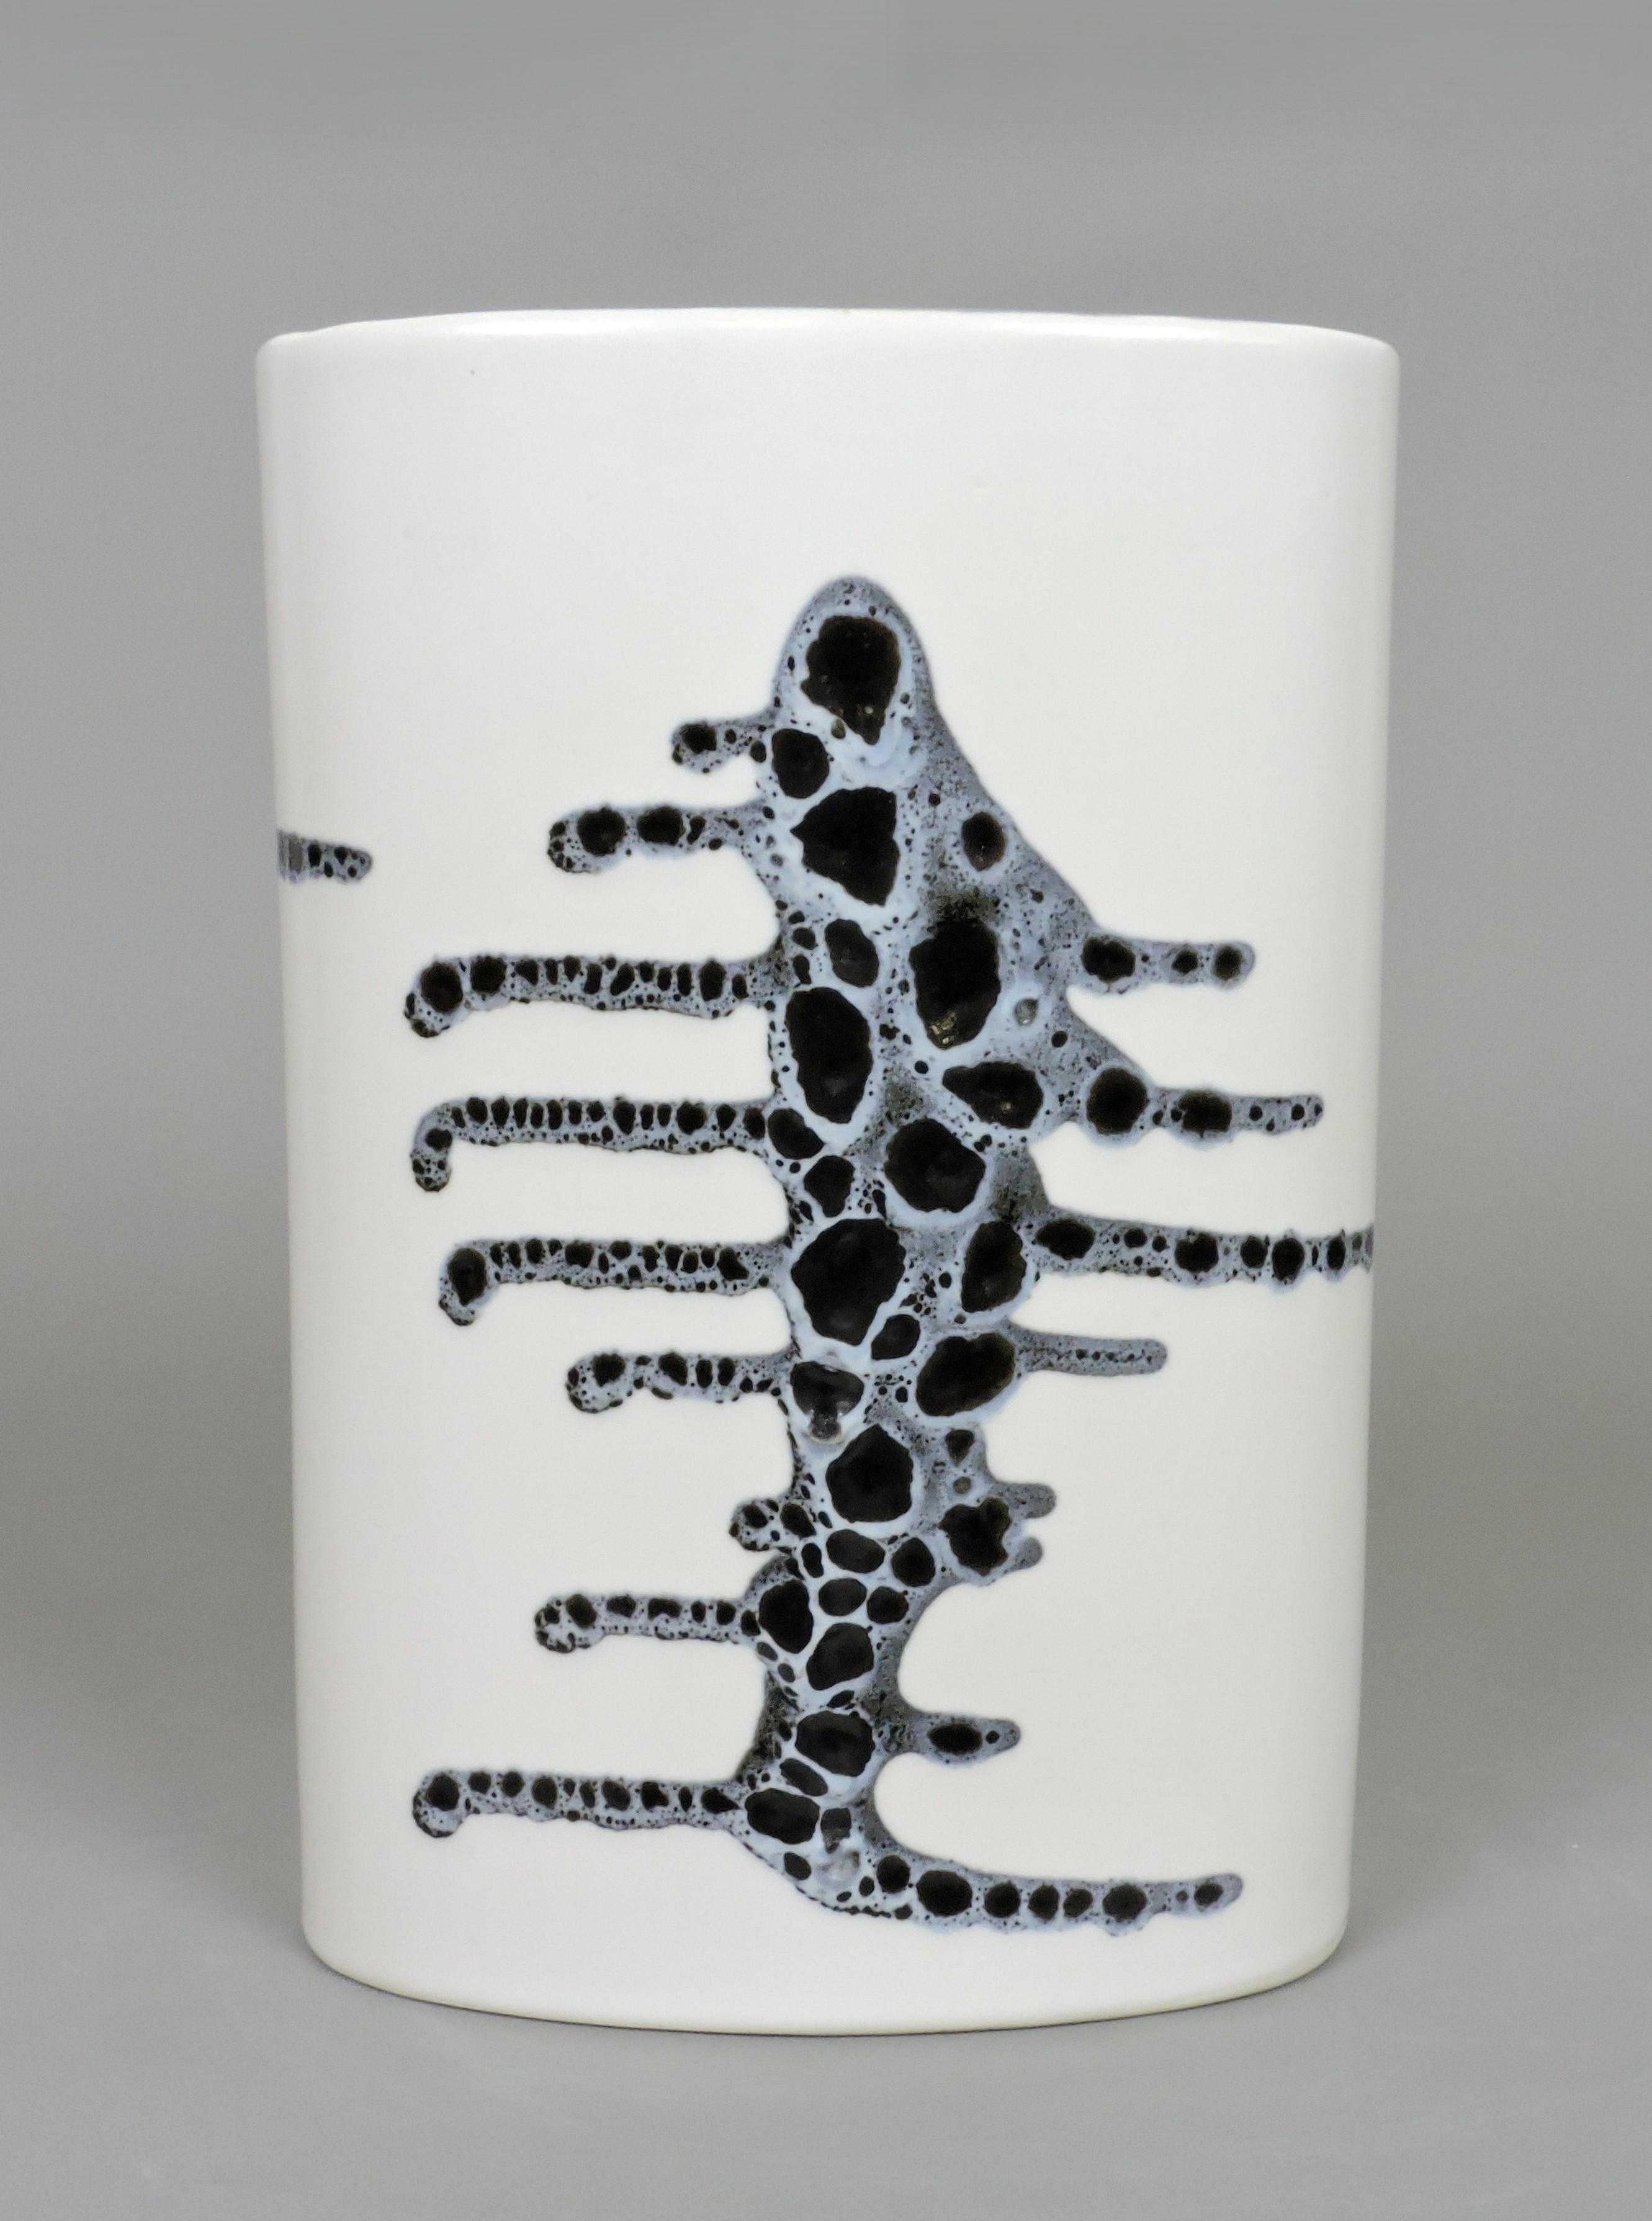 Large and striking modernist ceramic vase by Lapid of Israel. This vase has a white background with a black and gray 